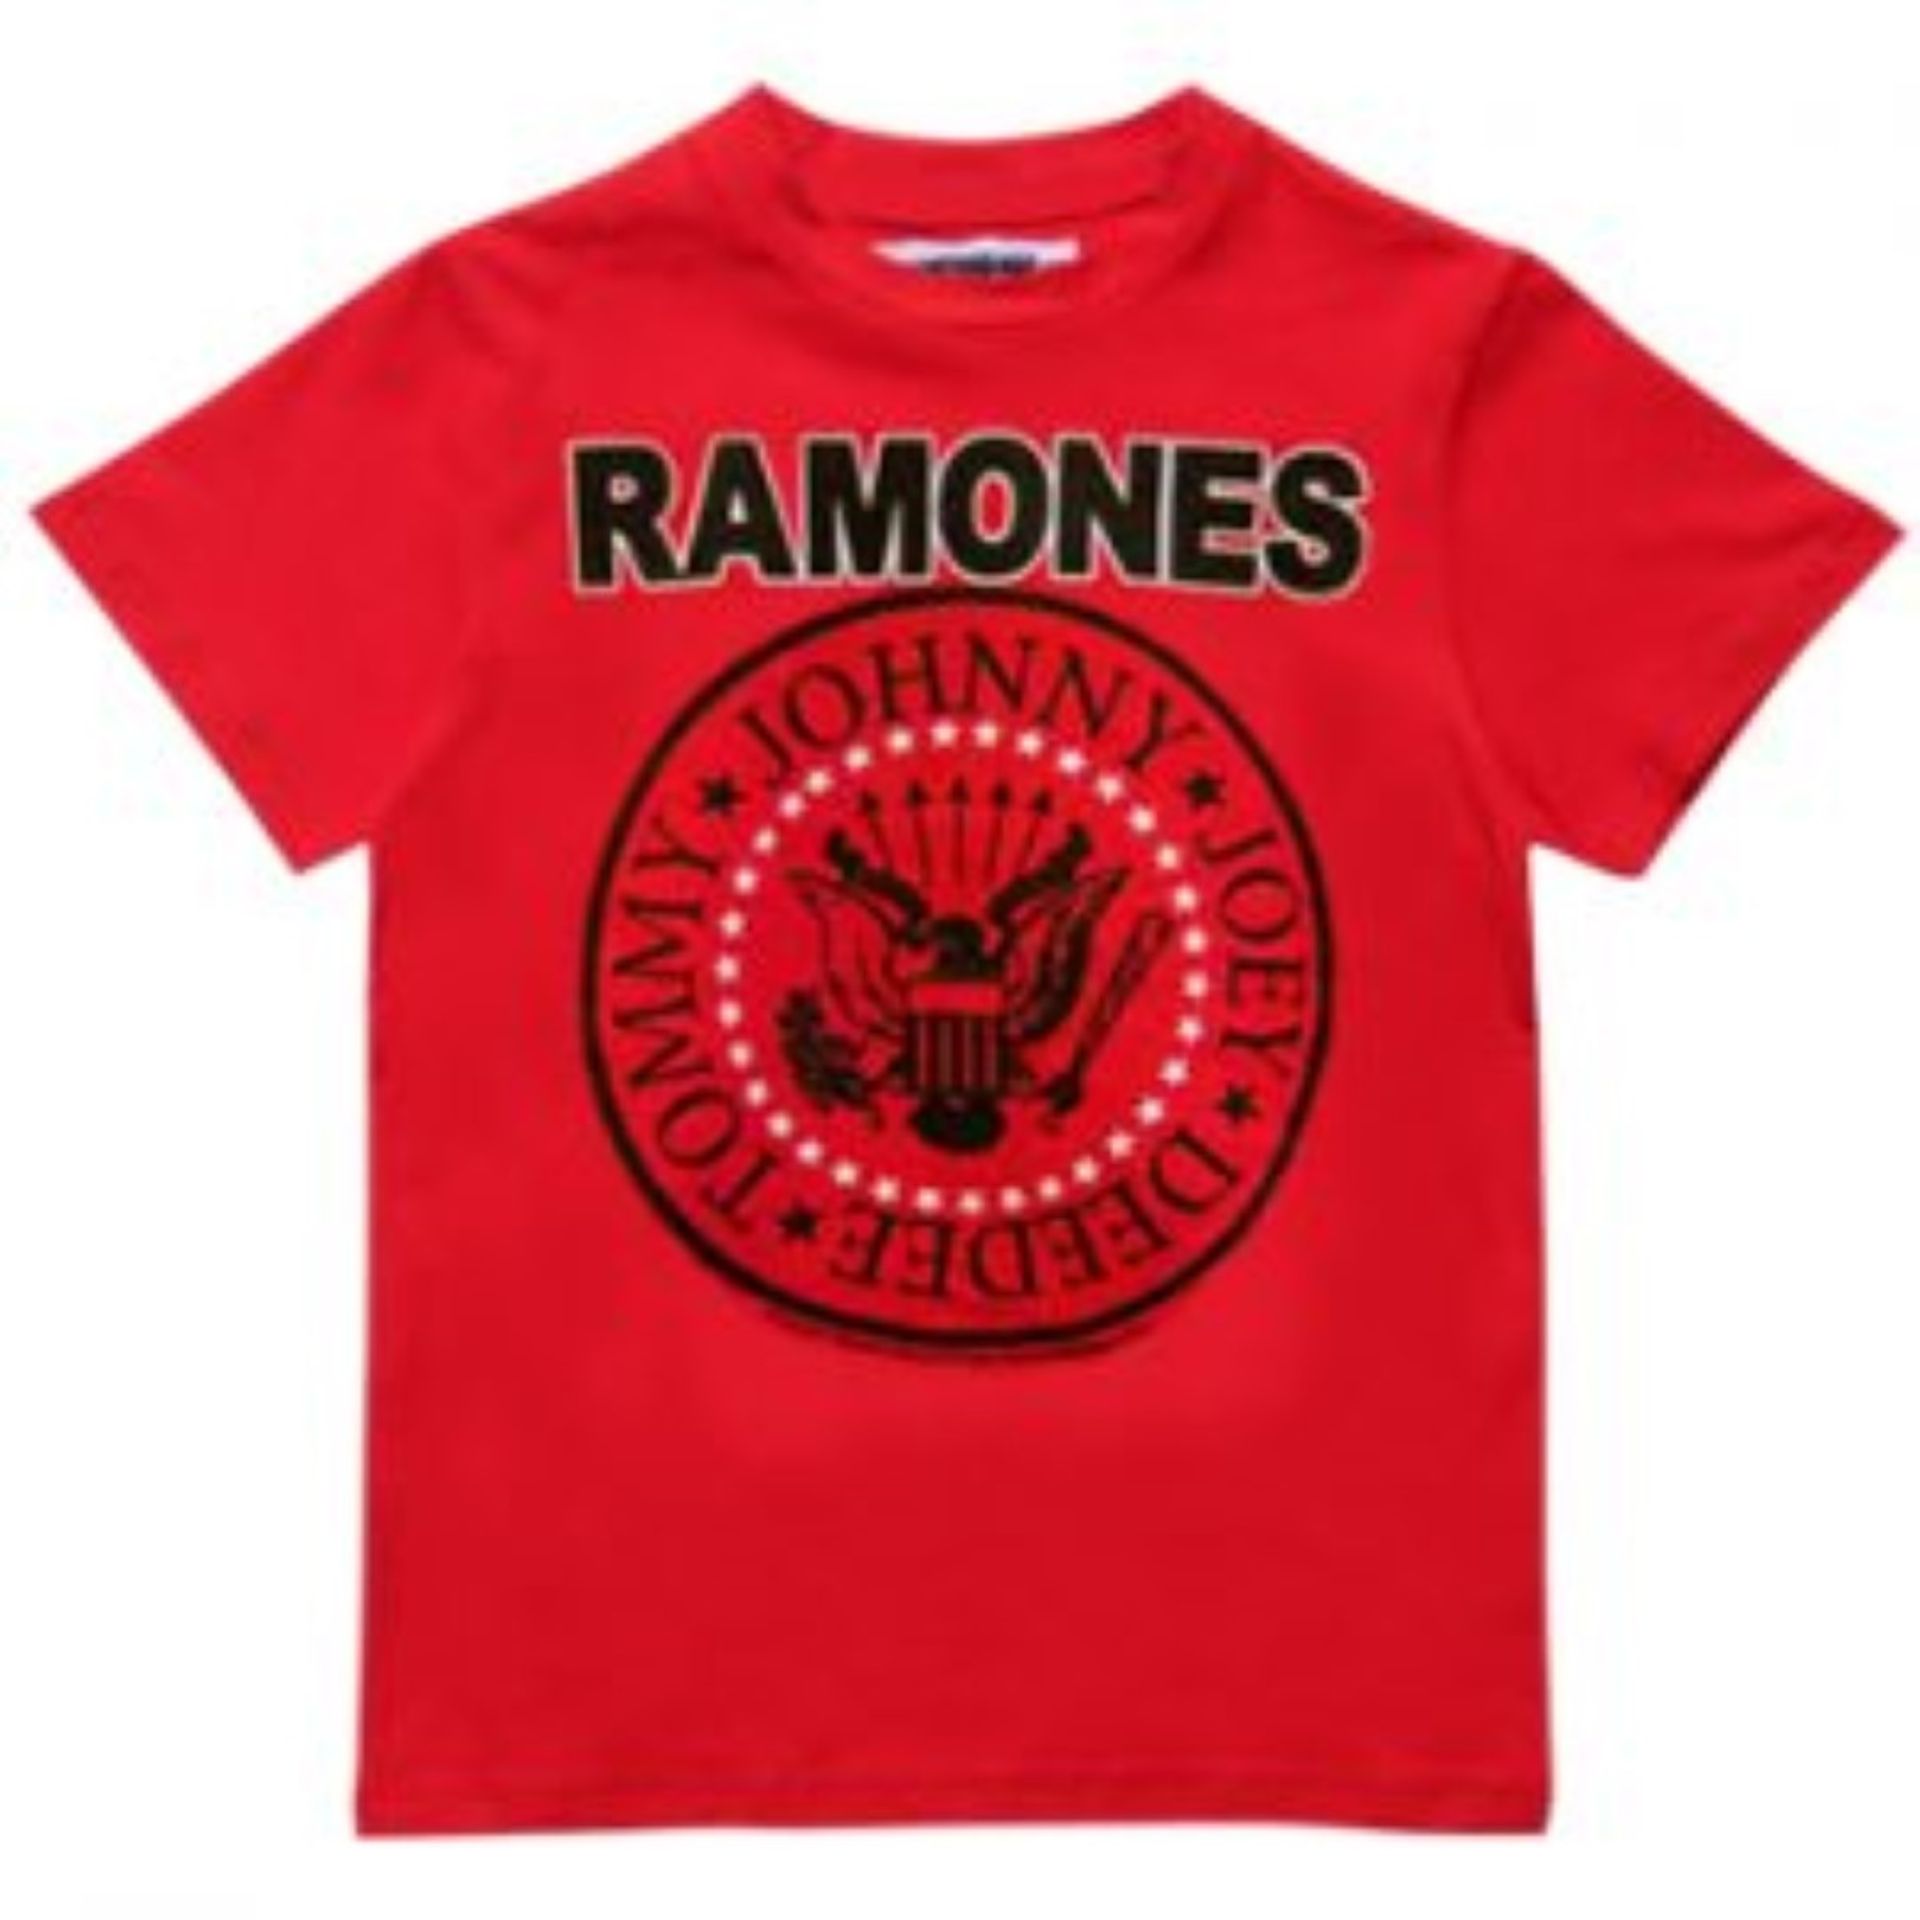 3 x Rock and Roll Themed KISS, Ramones and AC/DC Short Sleeve Baby T-Shirts - Size: 6 Months - - Image 5 of 10